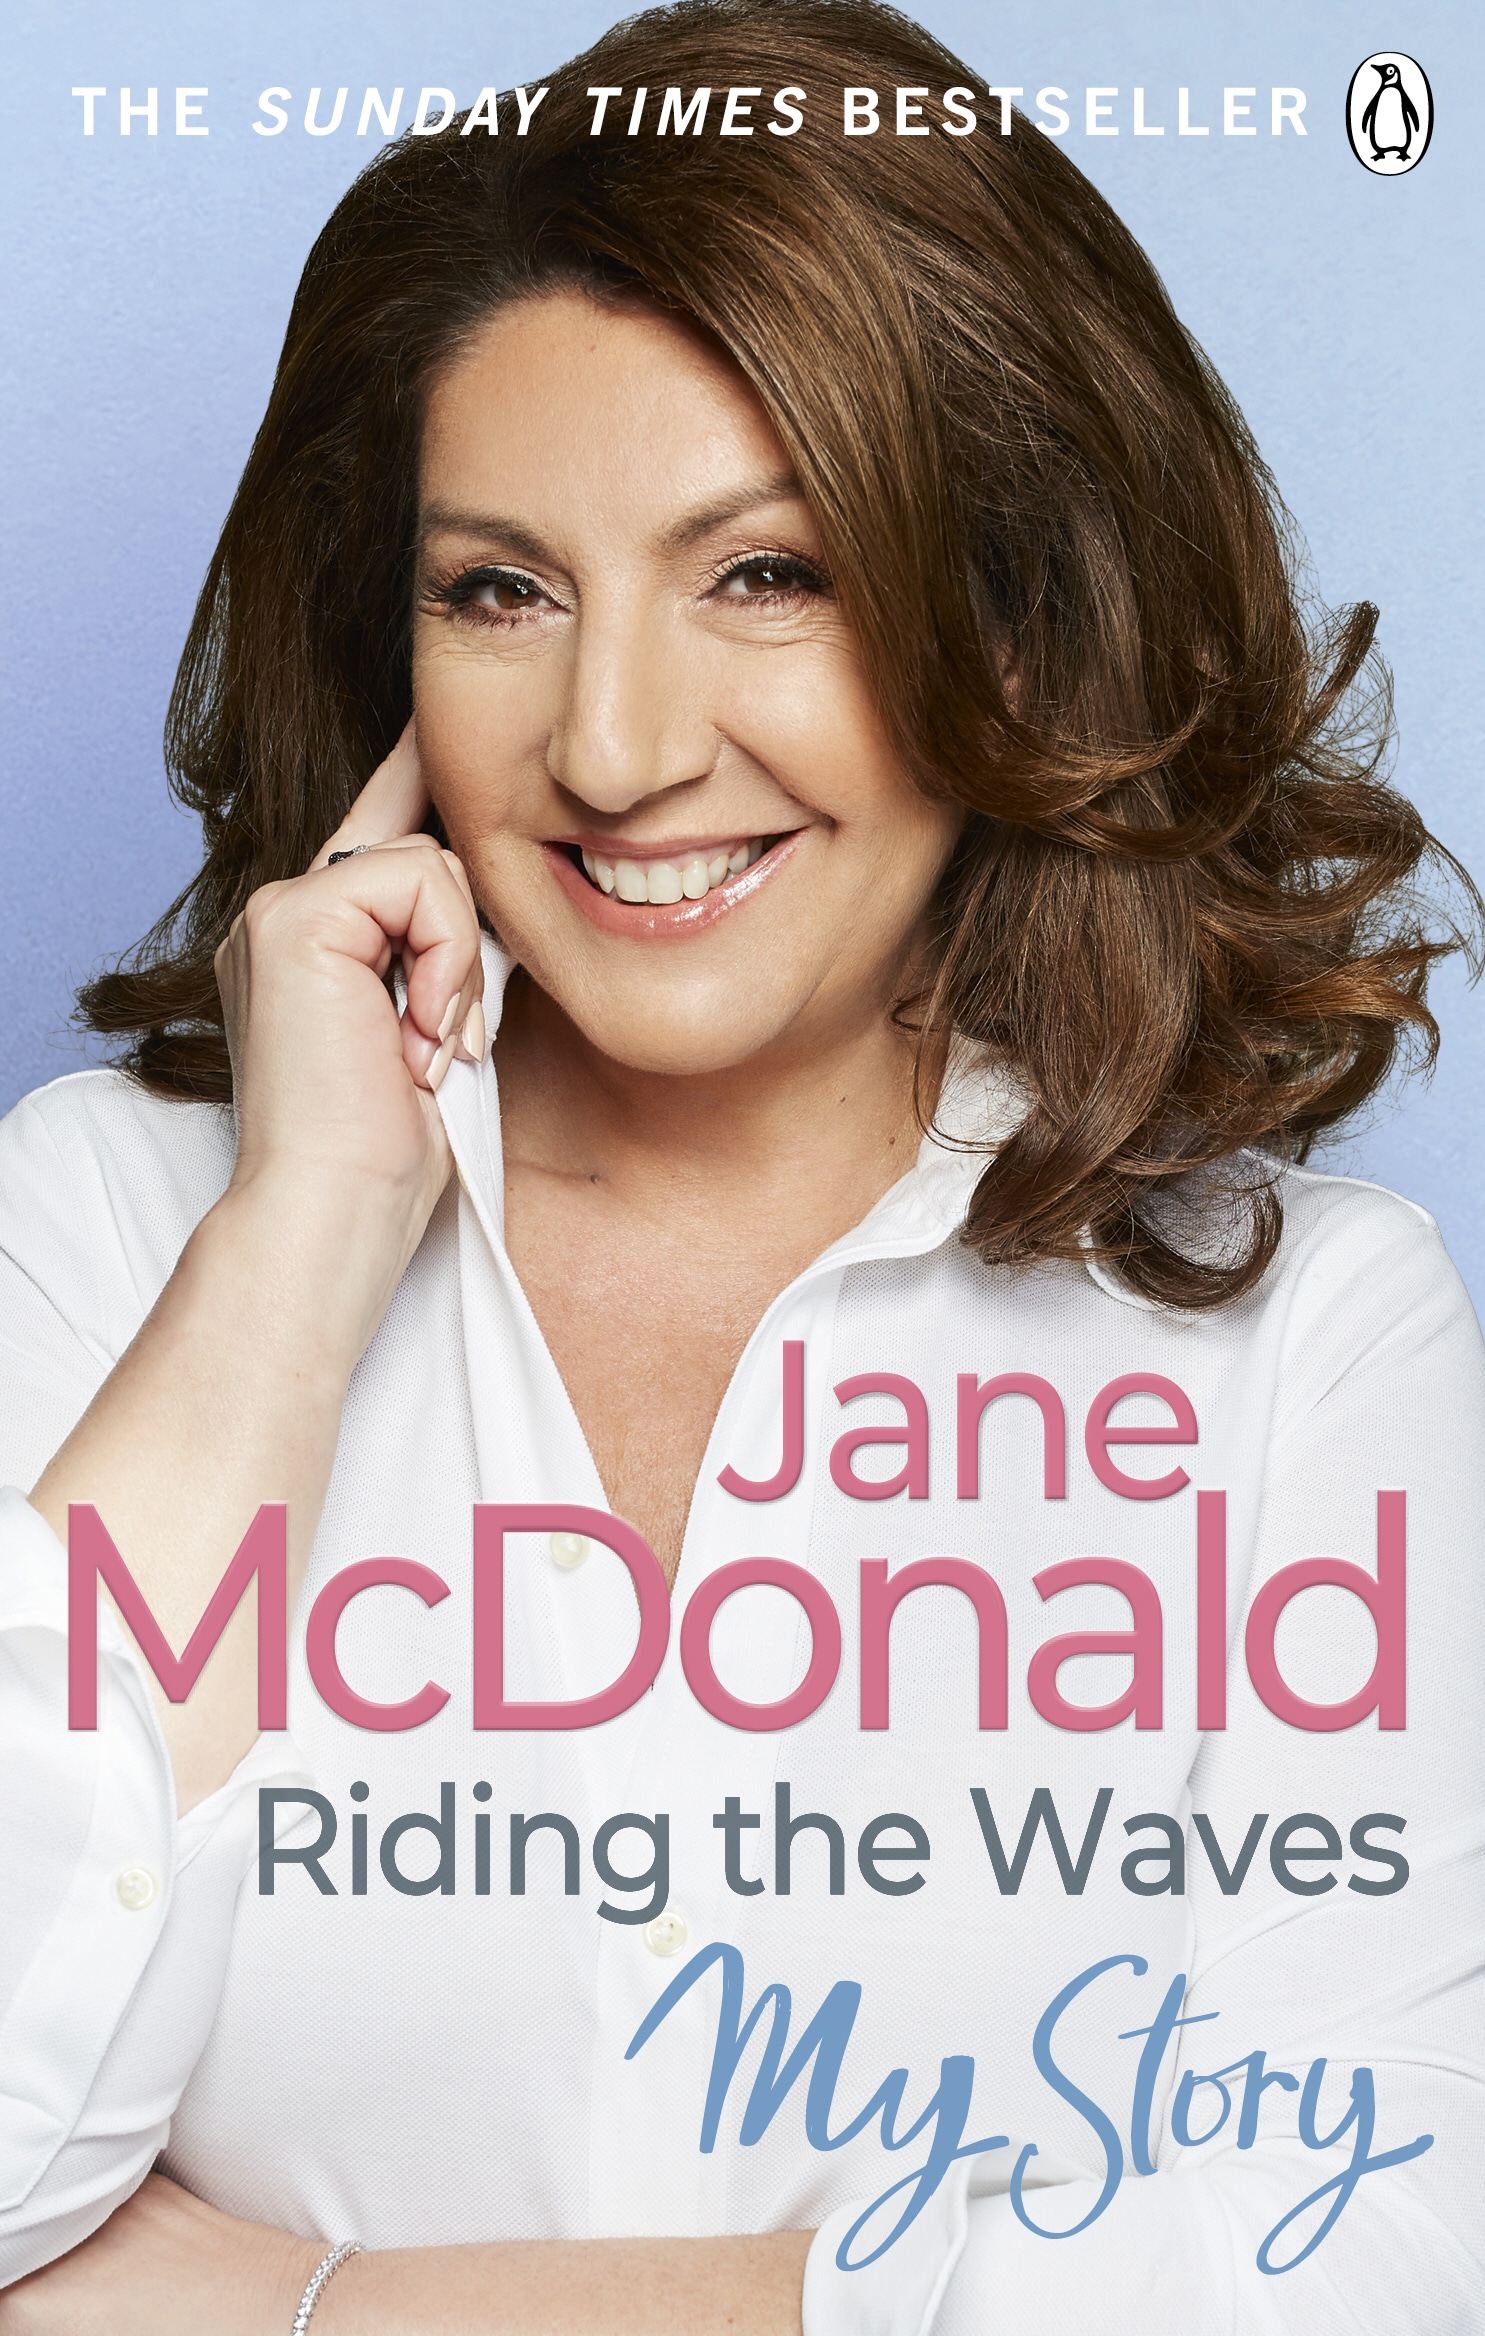 Book “Riding the Waves” by Jane McDonald — March 5, 2020